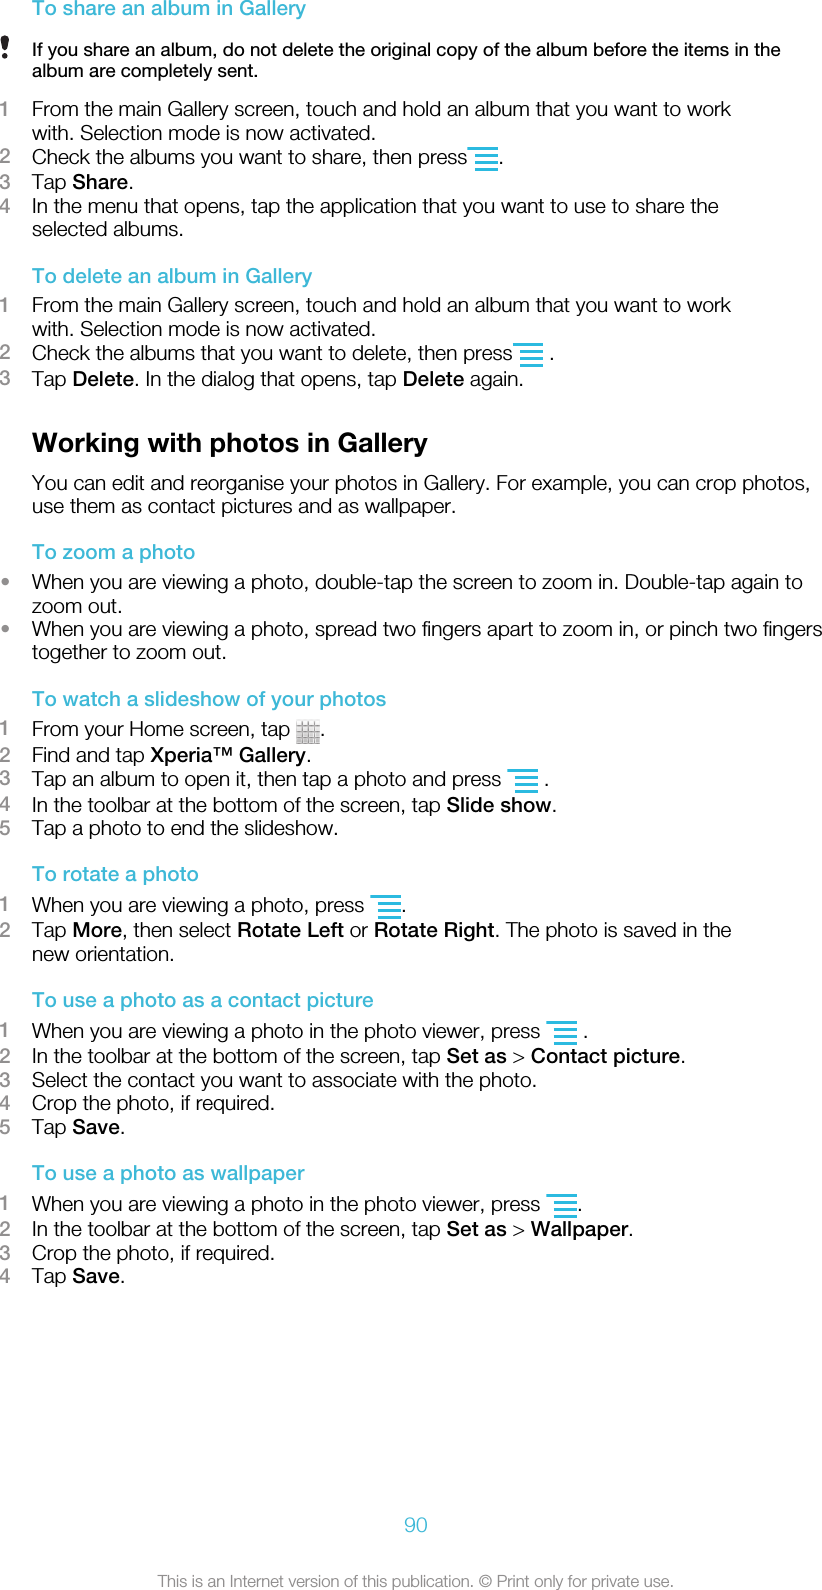 To share an album in GalleryIf you share an album, do not delete the original copy of the album before the items in thealbum are completely sent.1From the main Gallery screen, touch and hold an album that you want to workwith. Selection mode is now activated.2Check the albums you want to share, then press .3Tap Share.4In the menu that opens, tap the application that you want to use to share theselected albums.To delete an album in Gallery1From the main Gallery screen, touch and hold an album that you want to workwith. Selection mode is now activated.2Check the albums that you want to delete, then press  .3Tap Delete. In the dialog that opens, tap Delete again.Working with photos in GalleryYou can edit and reorganise your photos in Gallery. For example, you can crop photos,use them as contact pictures and as wallpaper.To zoom a photo•When you are viewing a photo, double-tap the screen to zoom in. Double-tap again tozoom out.•When you are viewing a photo, spread two fingers apart to zoom in, or pinch two fingerstogether to zoom out.To watch a slideshow of your photos1From your Home screen, tap  .2Find and tap Xperia™ Gallery.3Tap an album to open it, then tap a photo and press   .4In the toolbar at the bottom of the screen, tap Slide show.5Tap a photo to end the slideshow.To rotate a photo1When you are viewing a photo, press  .2Tap More, then select Rotate Left or Rotate Right. The photo is saved in thenew orientation.To use a photo as a contact picture1When you are viewing a photo in the photo viewer, press   .2In the toolbar at the bottom of the screen, tap Set as &gt; Contact picture.3Select the contact you want to associate with the photo.4Crop the photo, if required.5Tap Save.To use a photo as wallpaper1When you are viewing a photo in the photo viewer, press  .2In the toolbar at the bottom of the screen, tap Set as &gt; Wallpaper.3Crop the photo, if required.4Tap Save.90This is an Internet version of this publication. © Print only for private use.